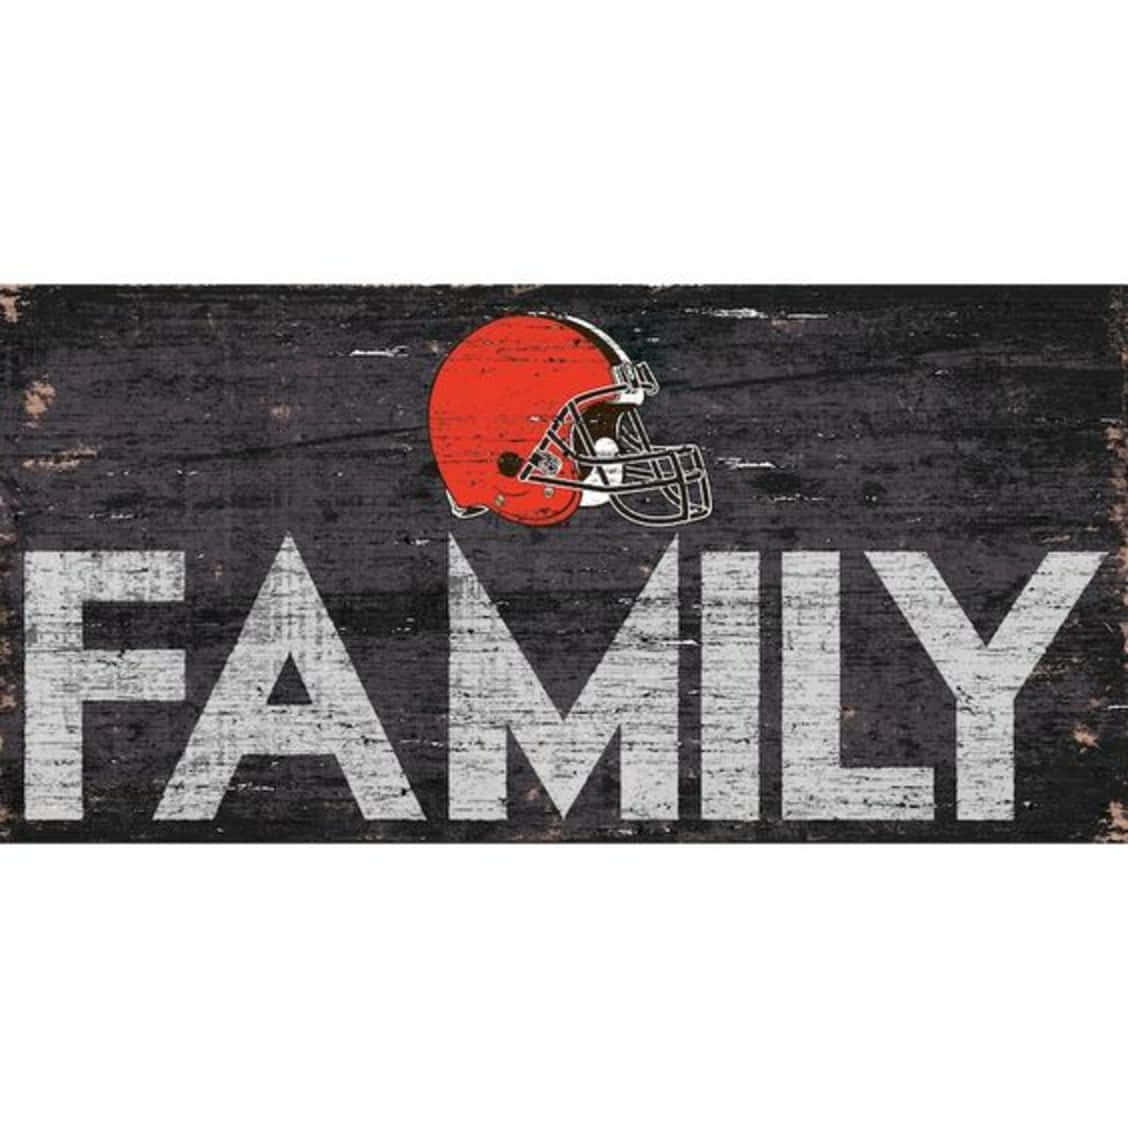 The official Cleveland Browns logo Wallpaper